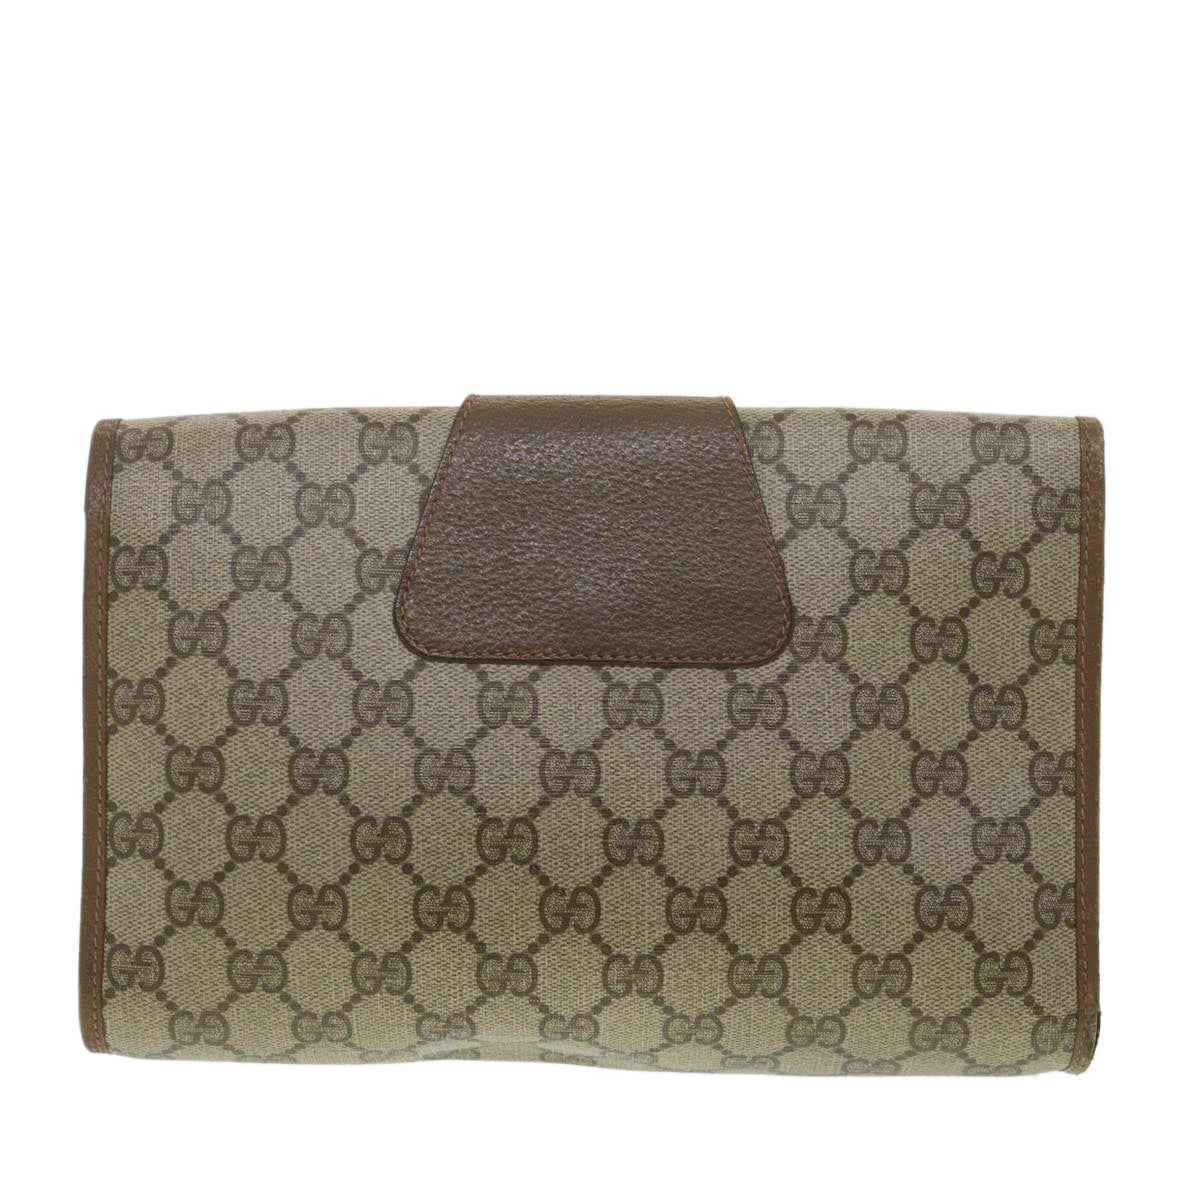 GUCCI GG Canvas Web Sherry Line Clutch Bag Beige Red Green 89.01.030 Auth ny215 - 0